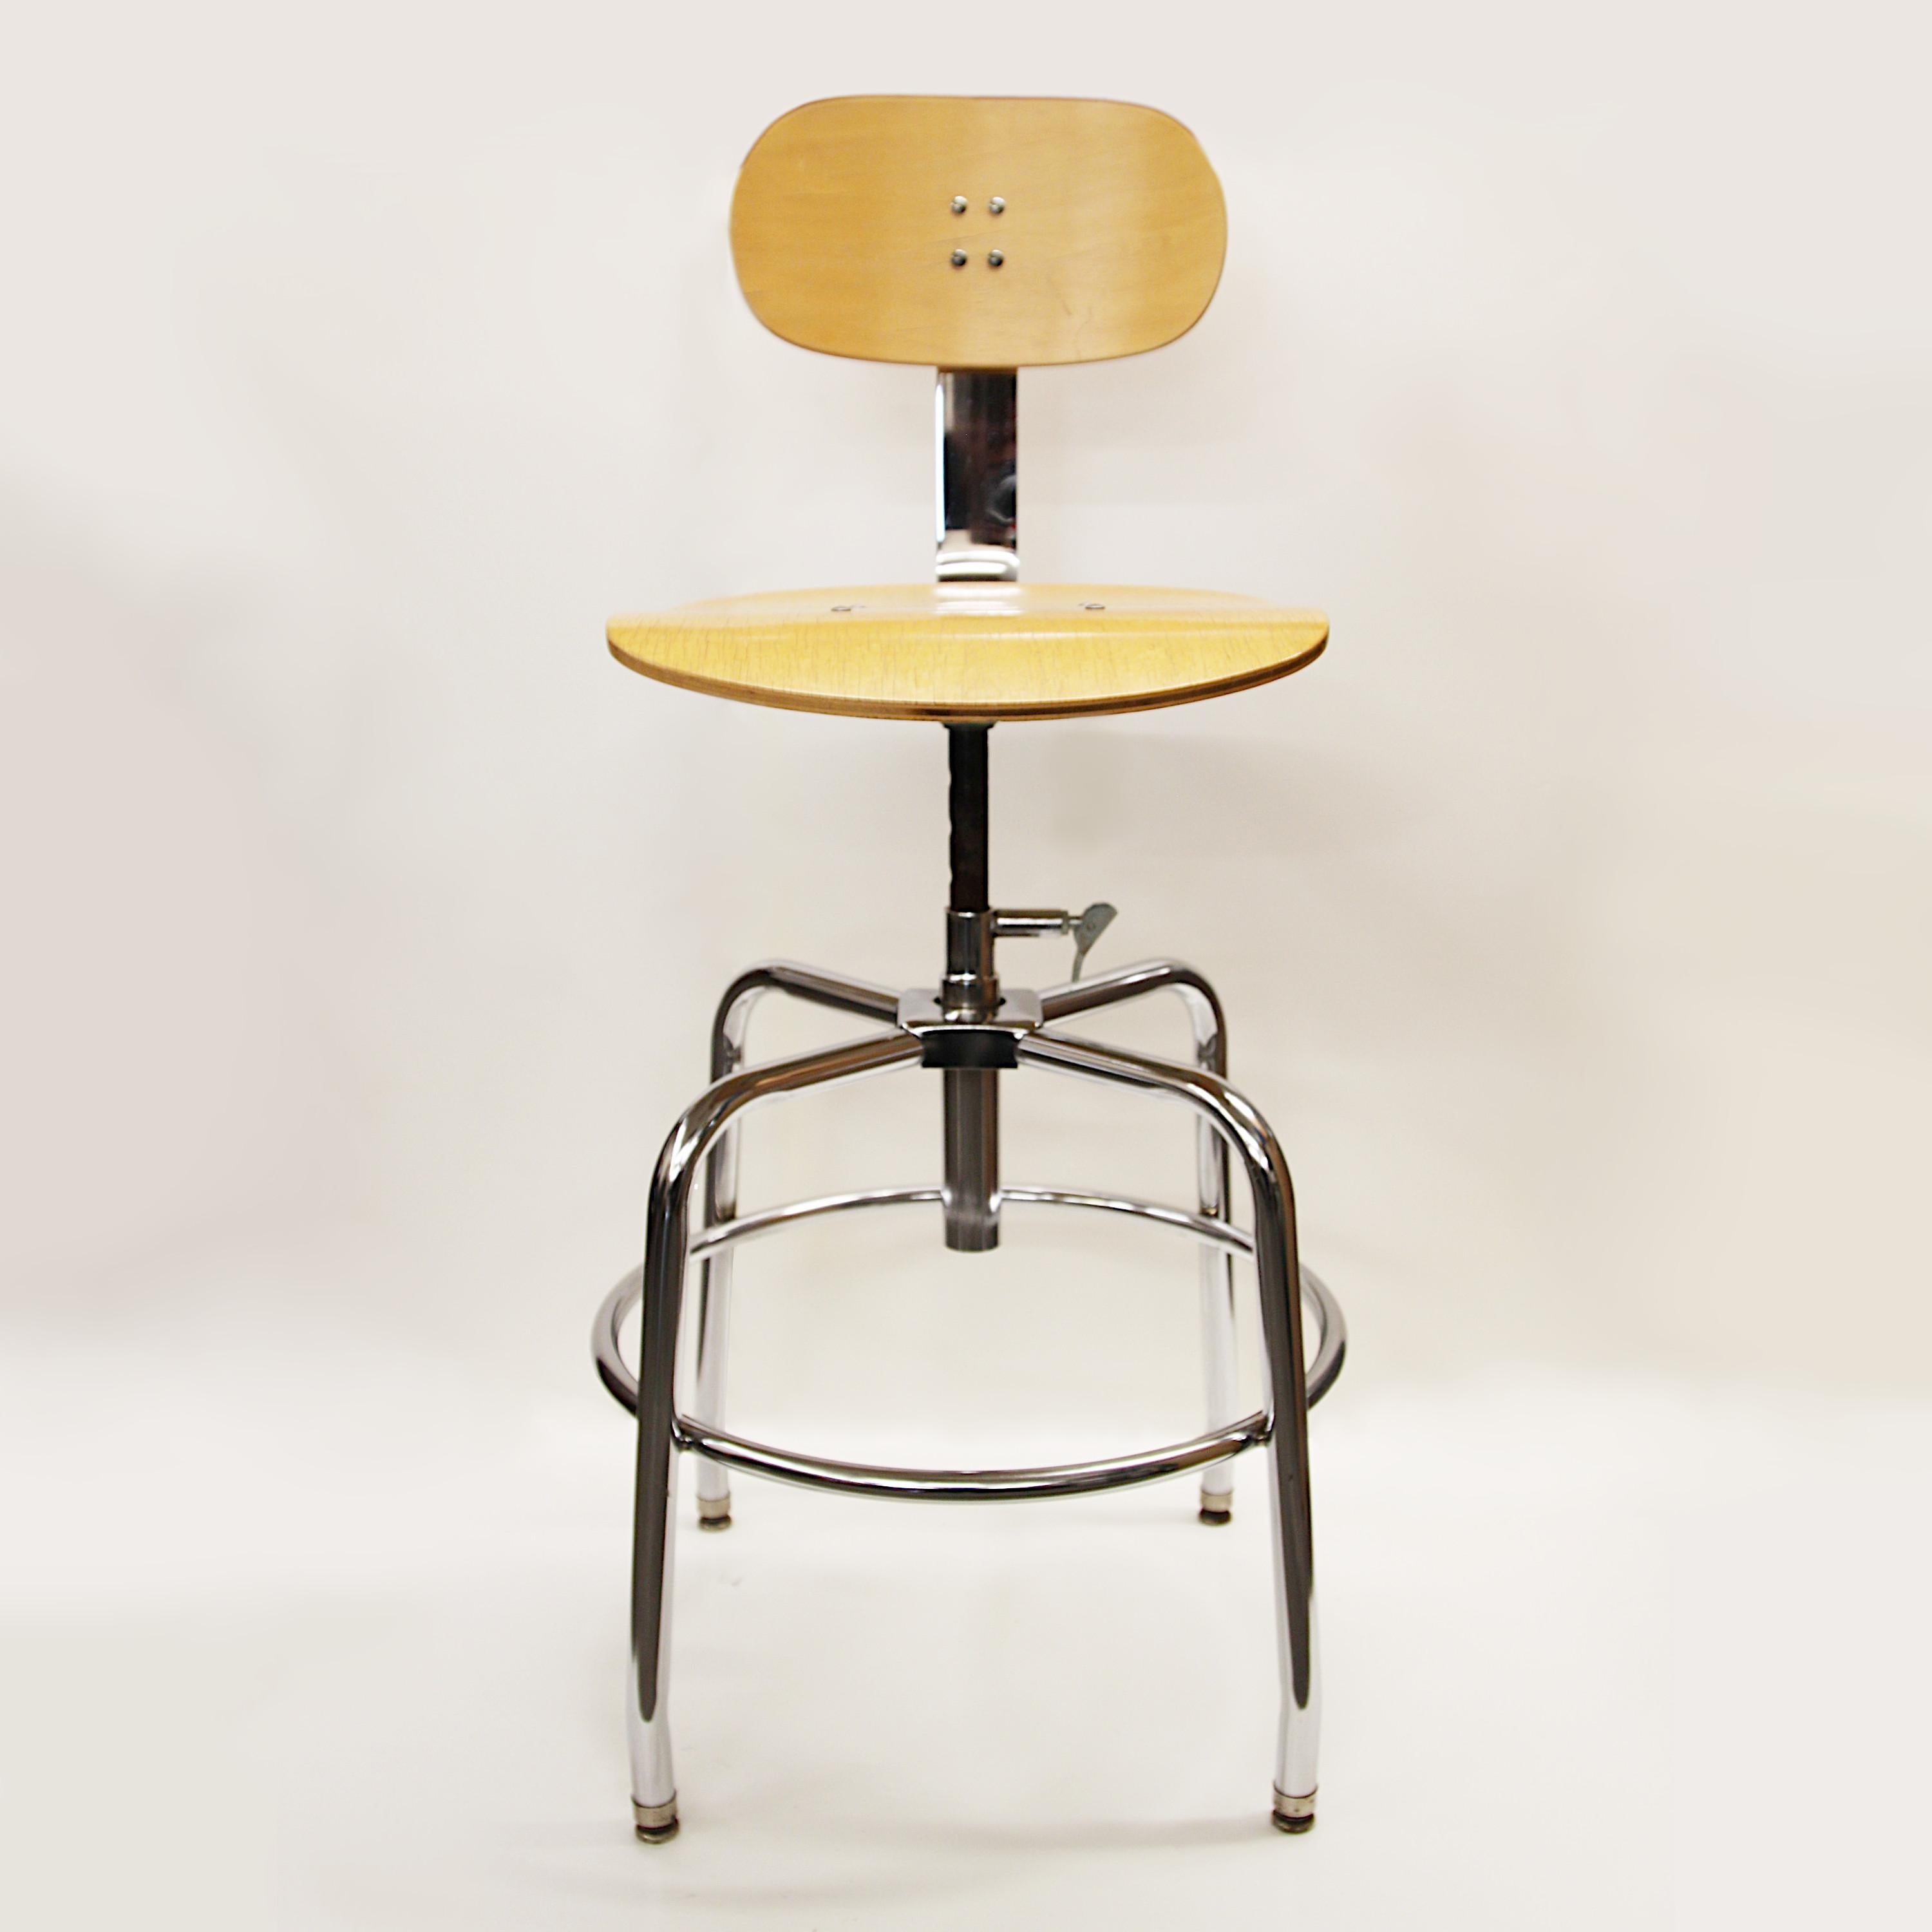 Late 20th Century Vintage Mid-Century Modern Maple & Chrome Industrial Bar Drafting Stools For Sale